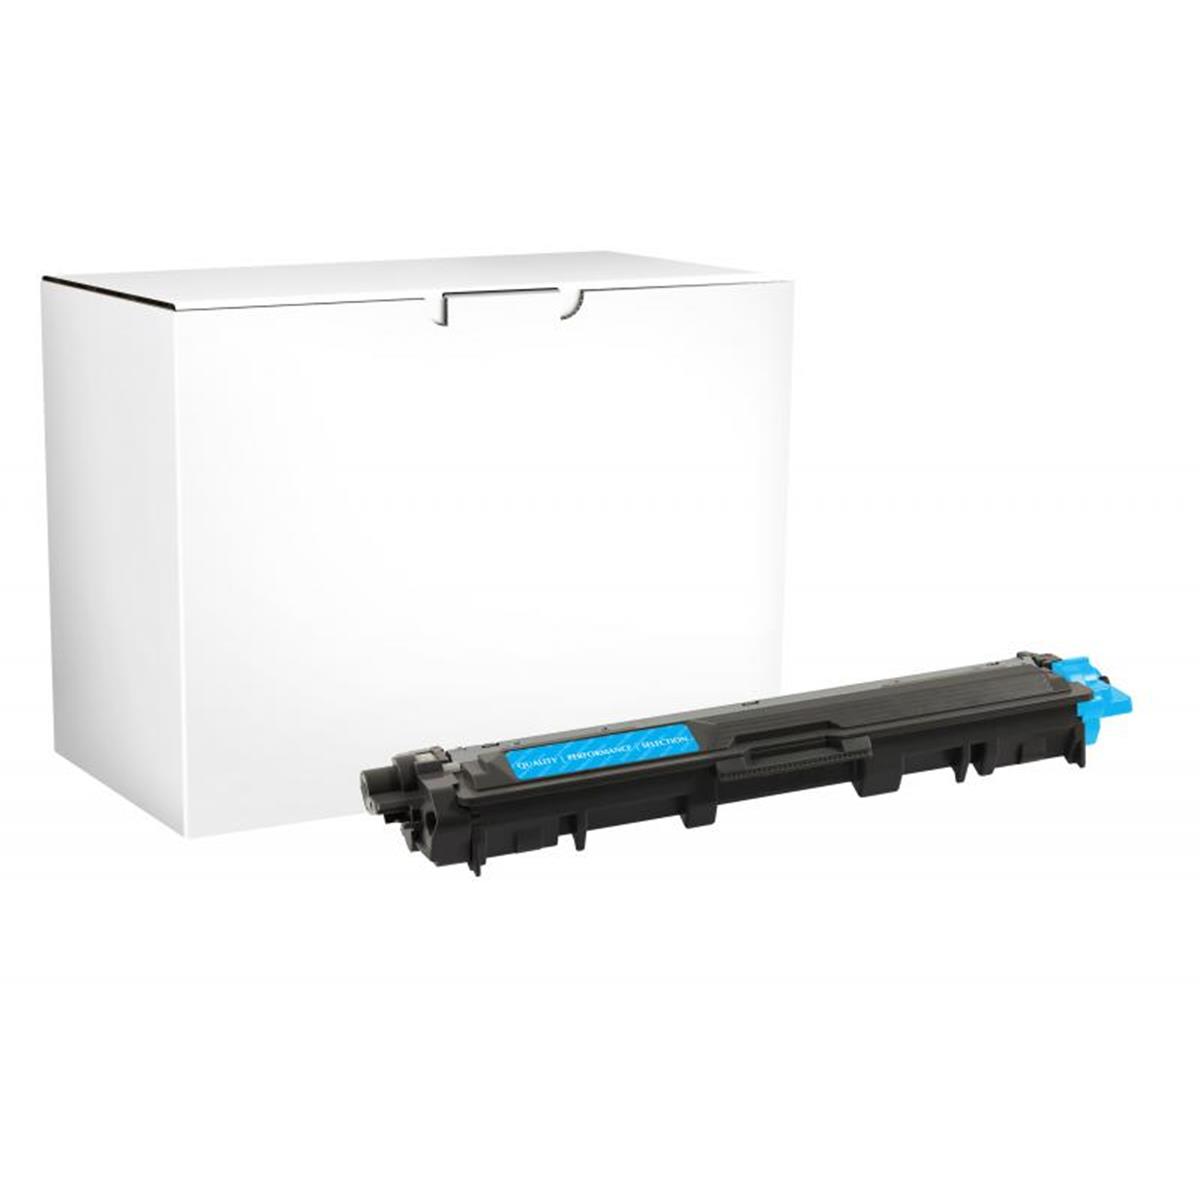 Picture of Brother 200732 High Yield Cyan Toner Cartridge for TN225